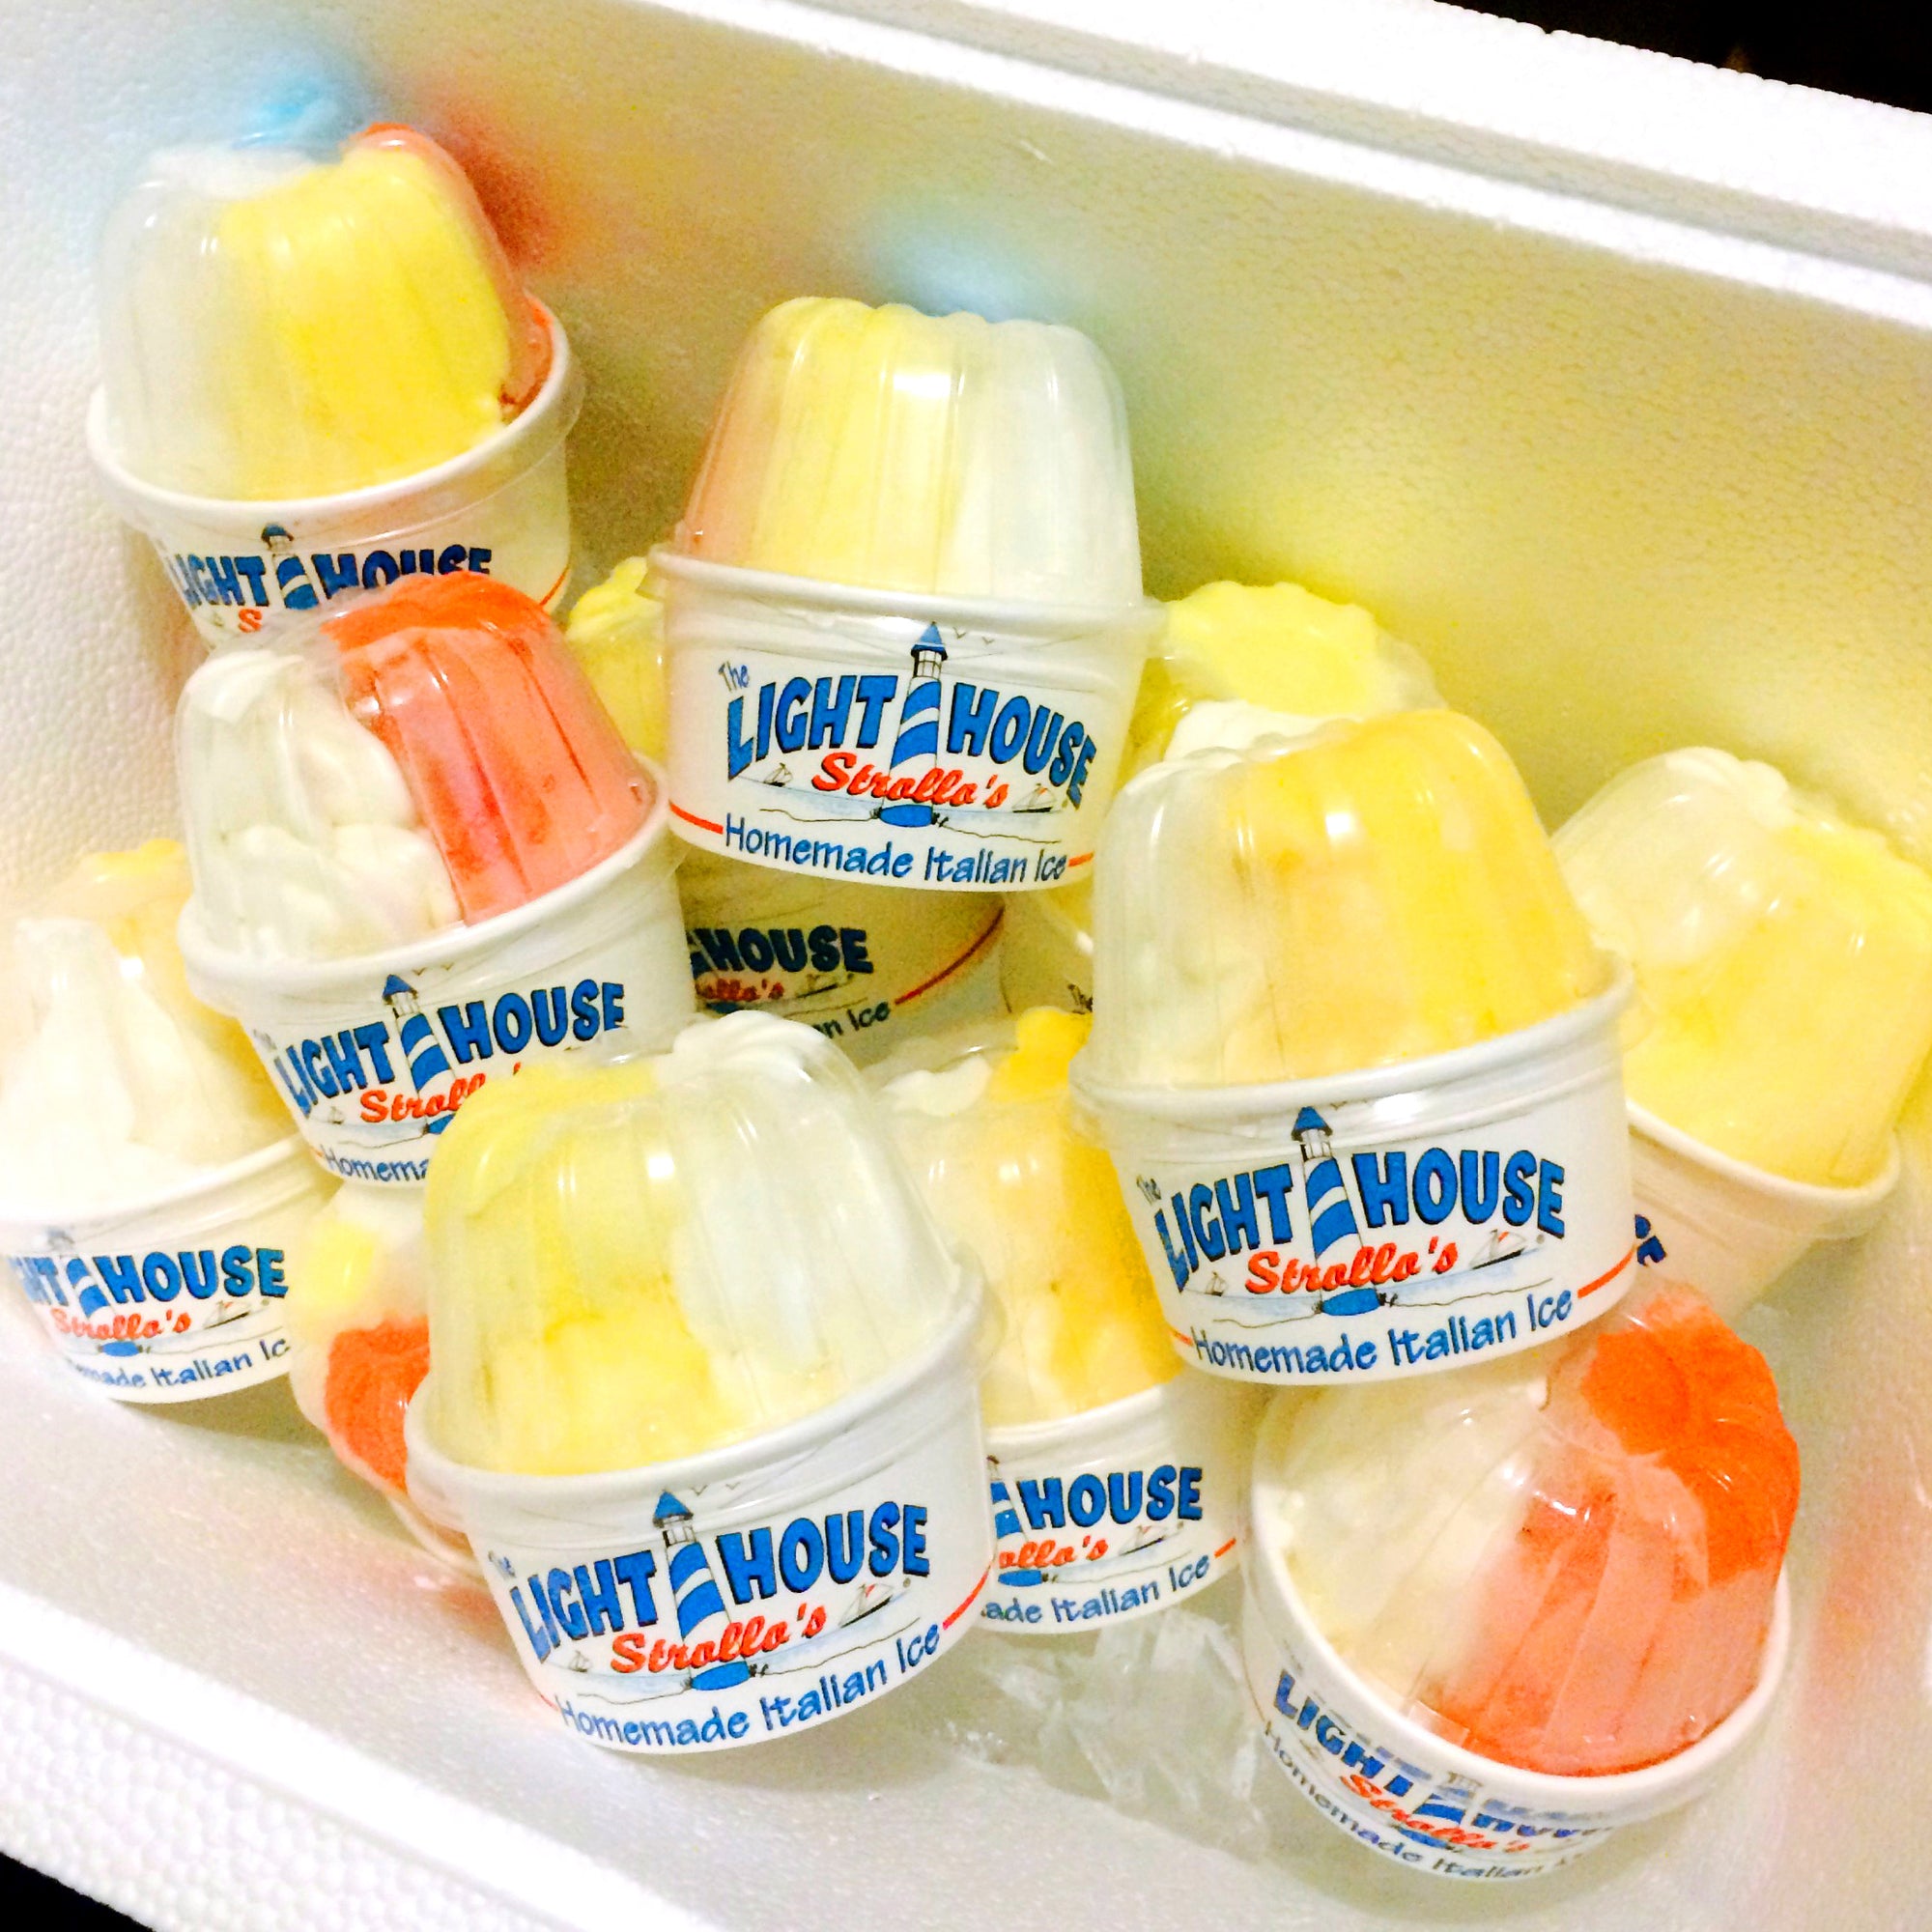 A Strollo's Lighthouse cooler full of cups of homemade Italian Ice and soft serve ice cream